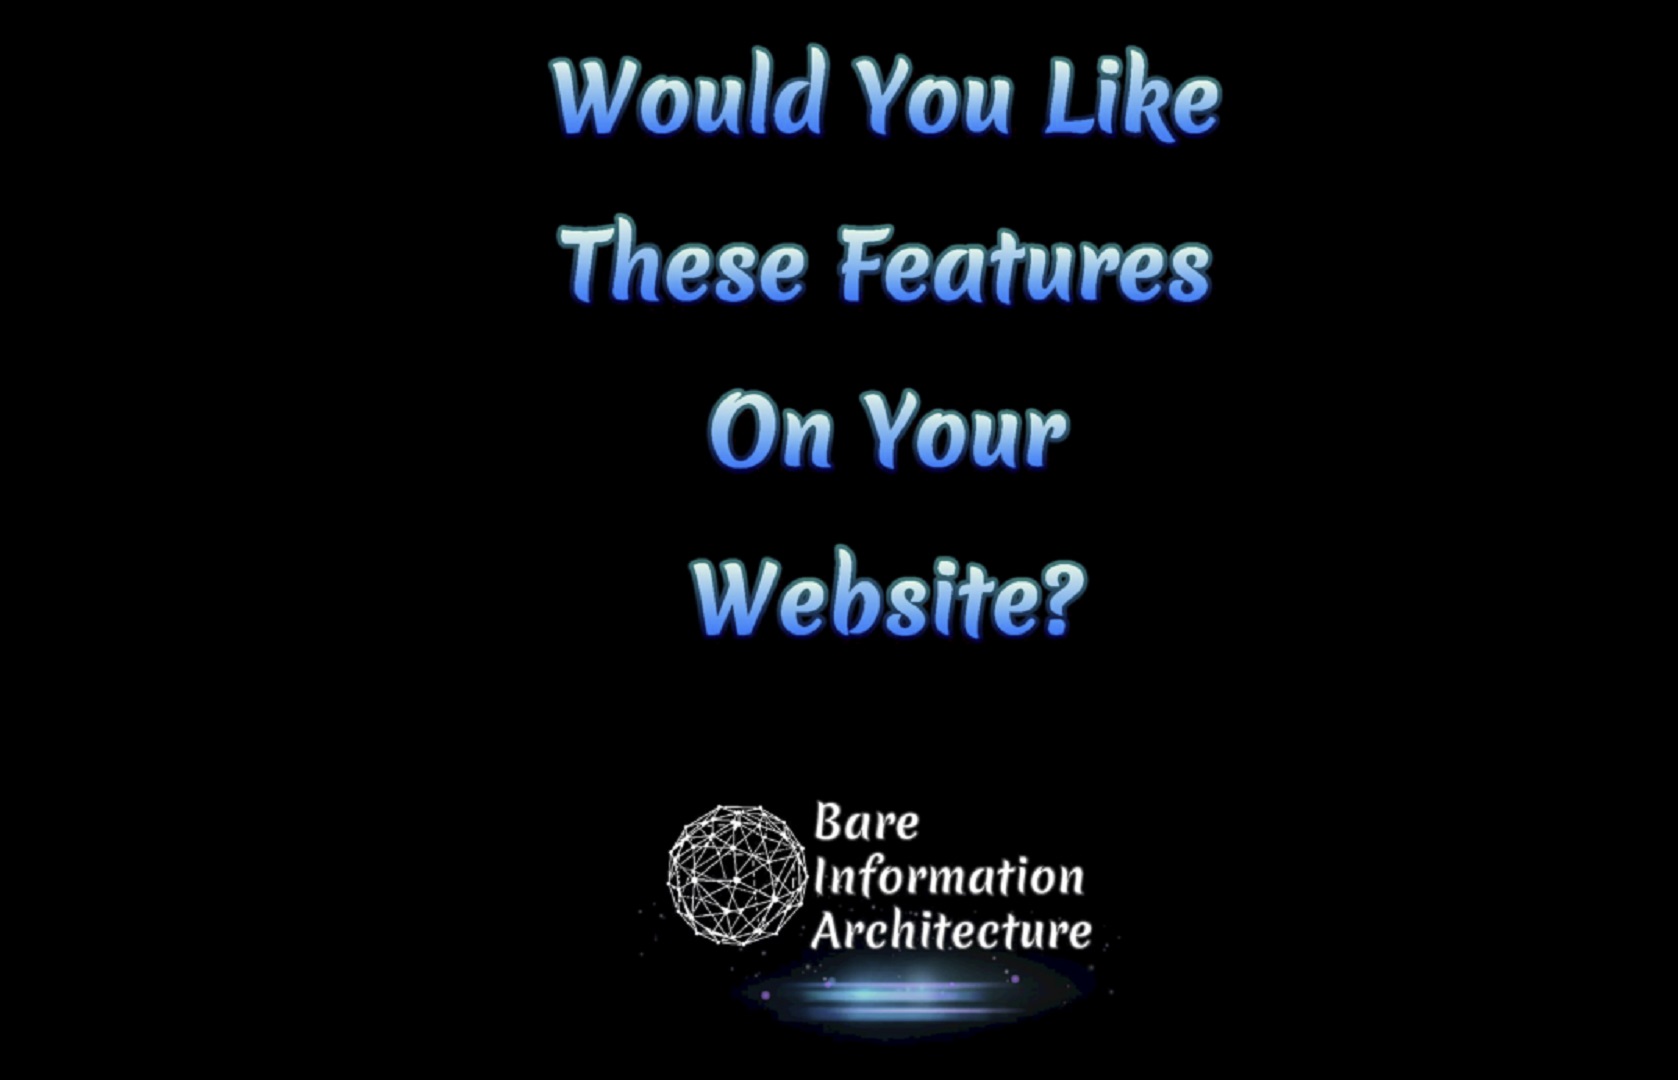 Would You Like These Features On Your Website?